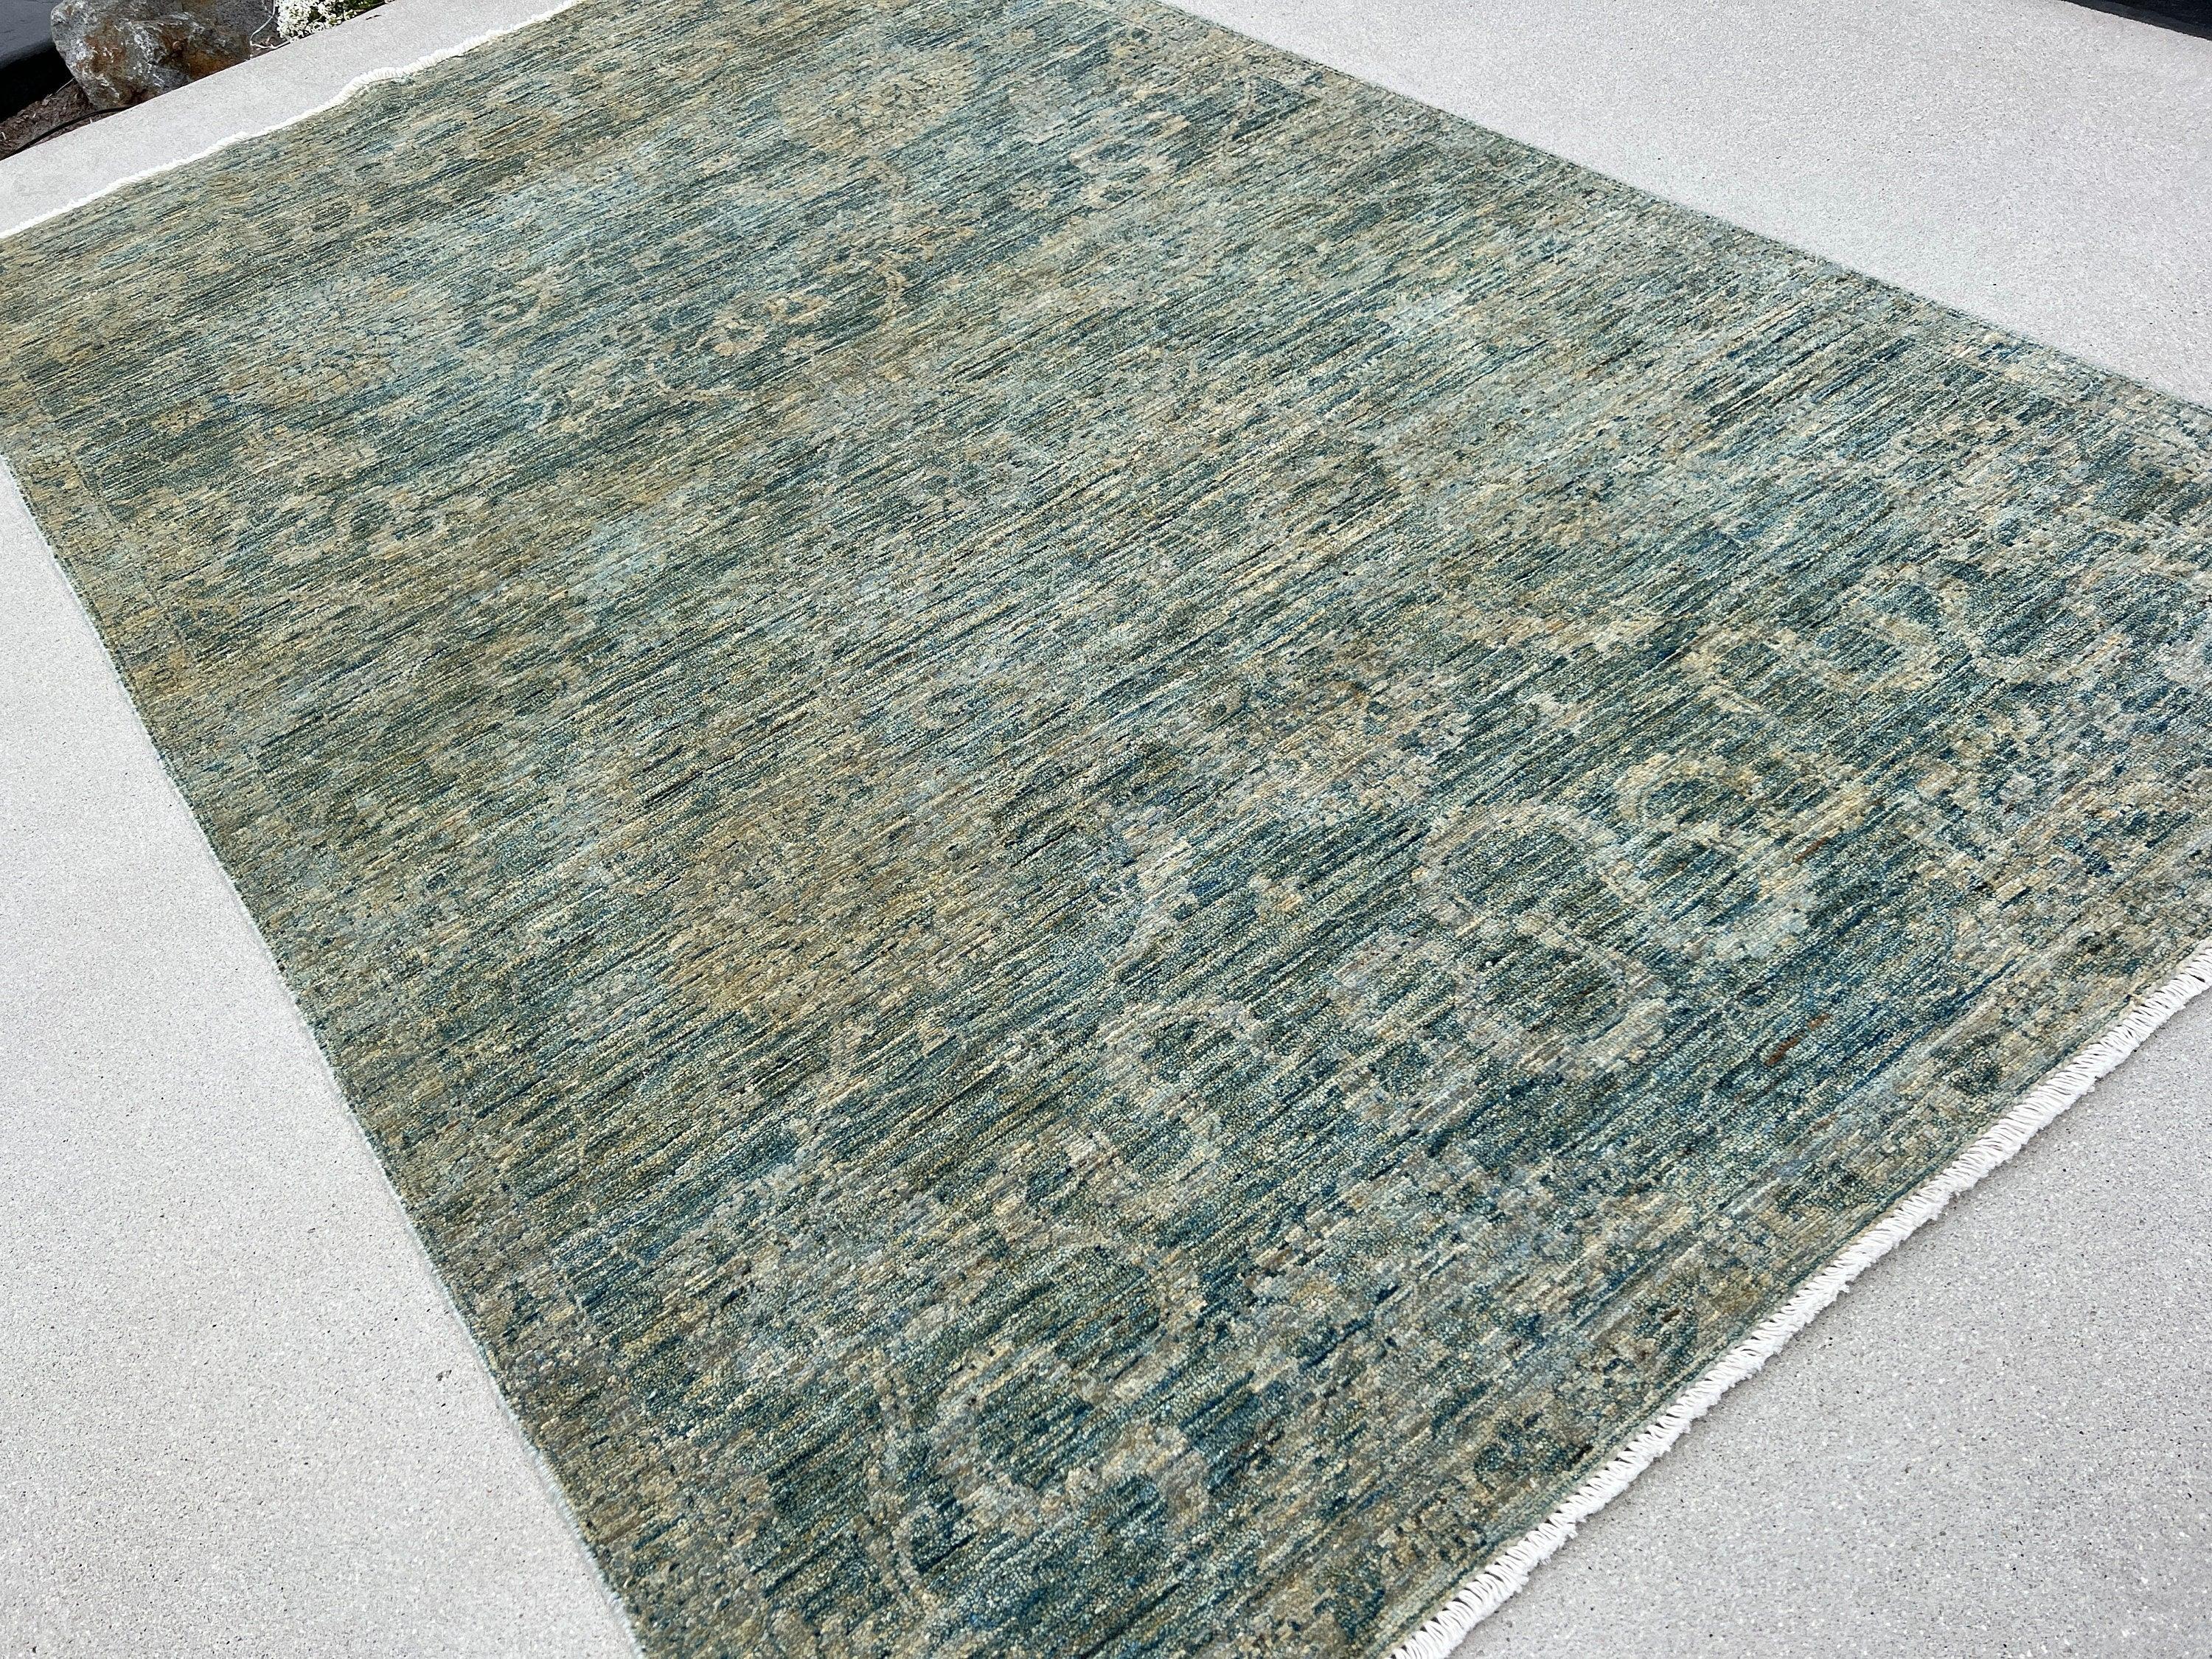 5x8 Hand Knotted Handmade Afghan Rug | Muted Teal Beige Grey Ivory Green Brown | Wool Boho Bohemian Contemporary Woolen Distressed